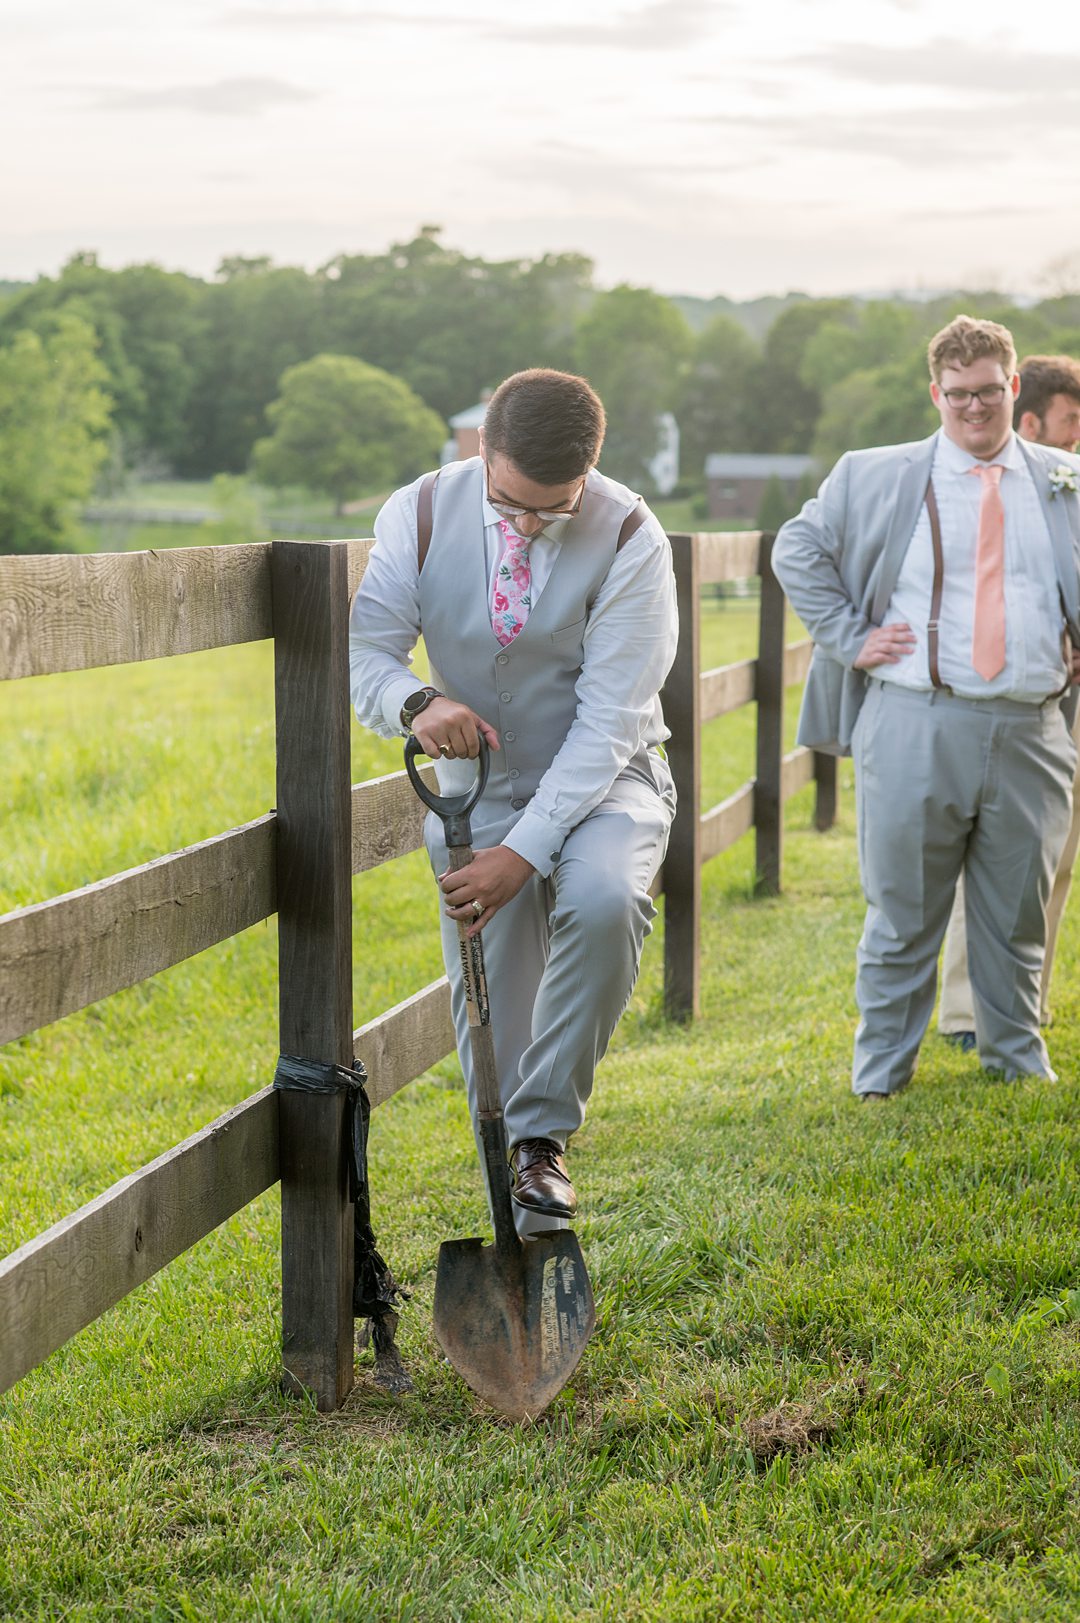 Burying the bourbon is a southern tradition this bride and groom did for their wedding in Charlottesville, VA at the Lodge at Mount Ida Farm. Photos by Mikkel Paige Photography. #mikkelpaige #charlottesvillewedding #mountidafarm